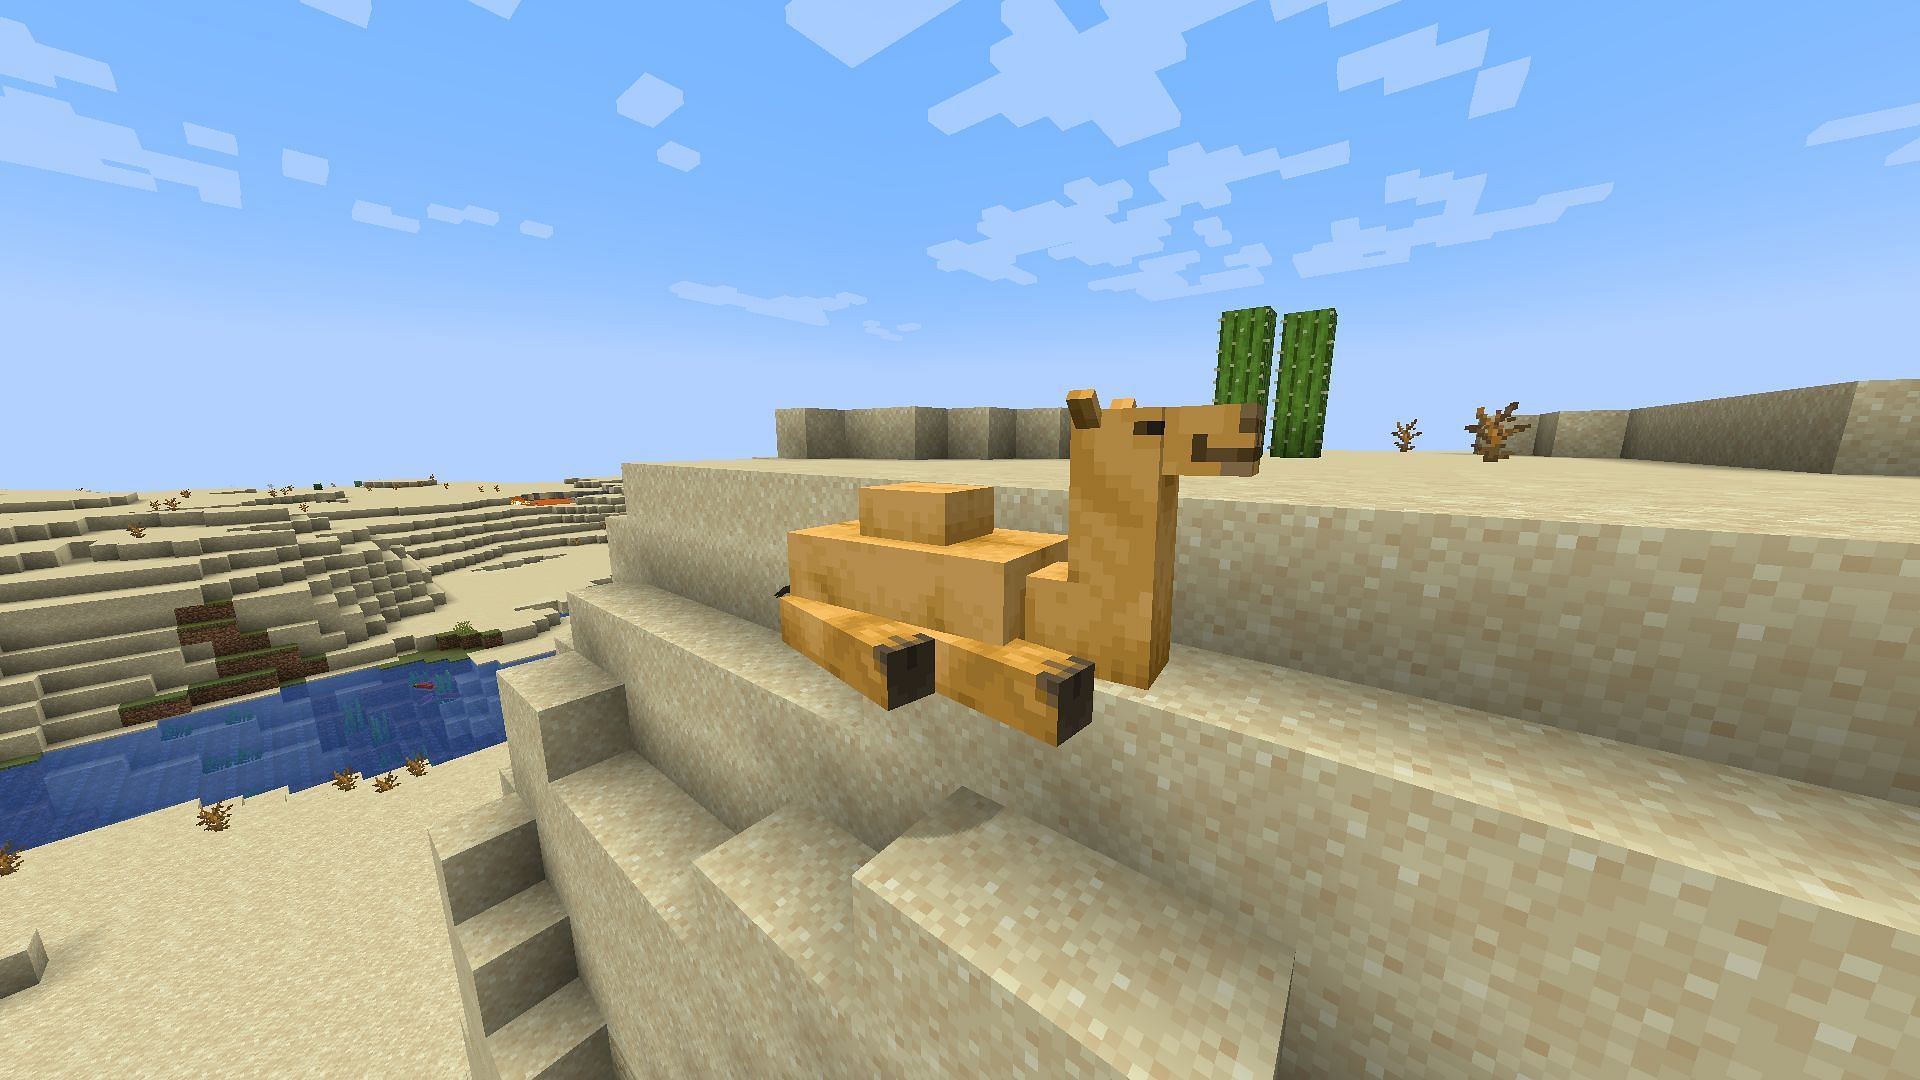 Camels will randomly sit and not move, even when players are riding them in Minecraft 1.20 update (Image via Mojang)